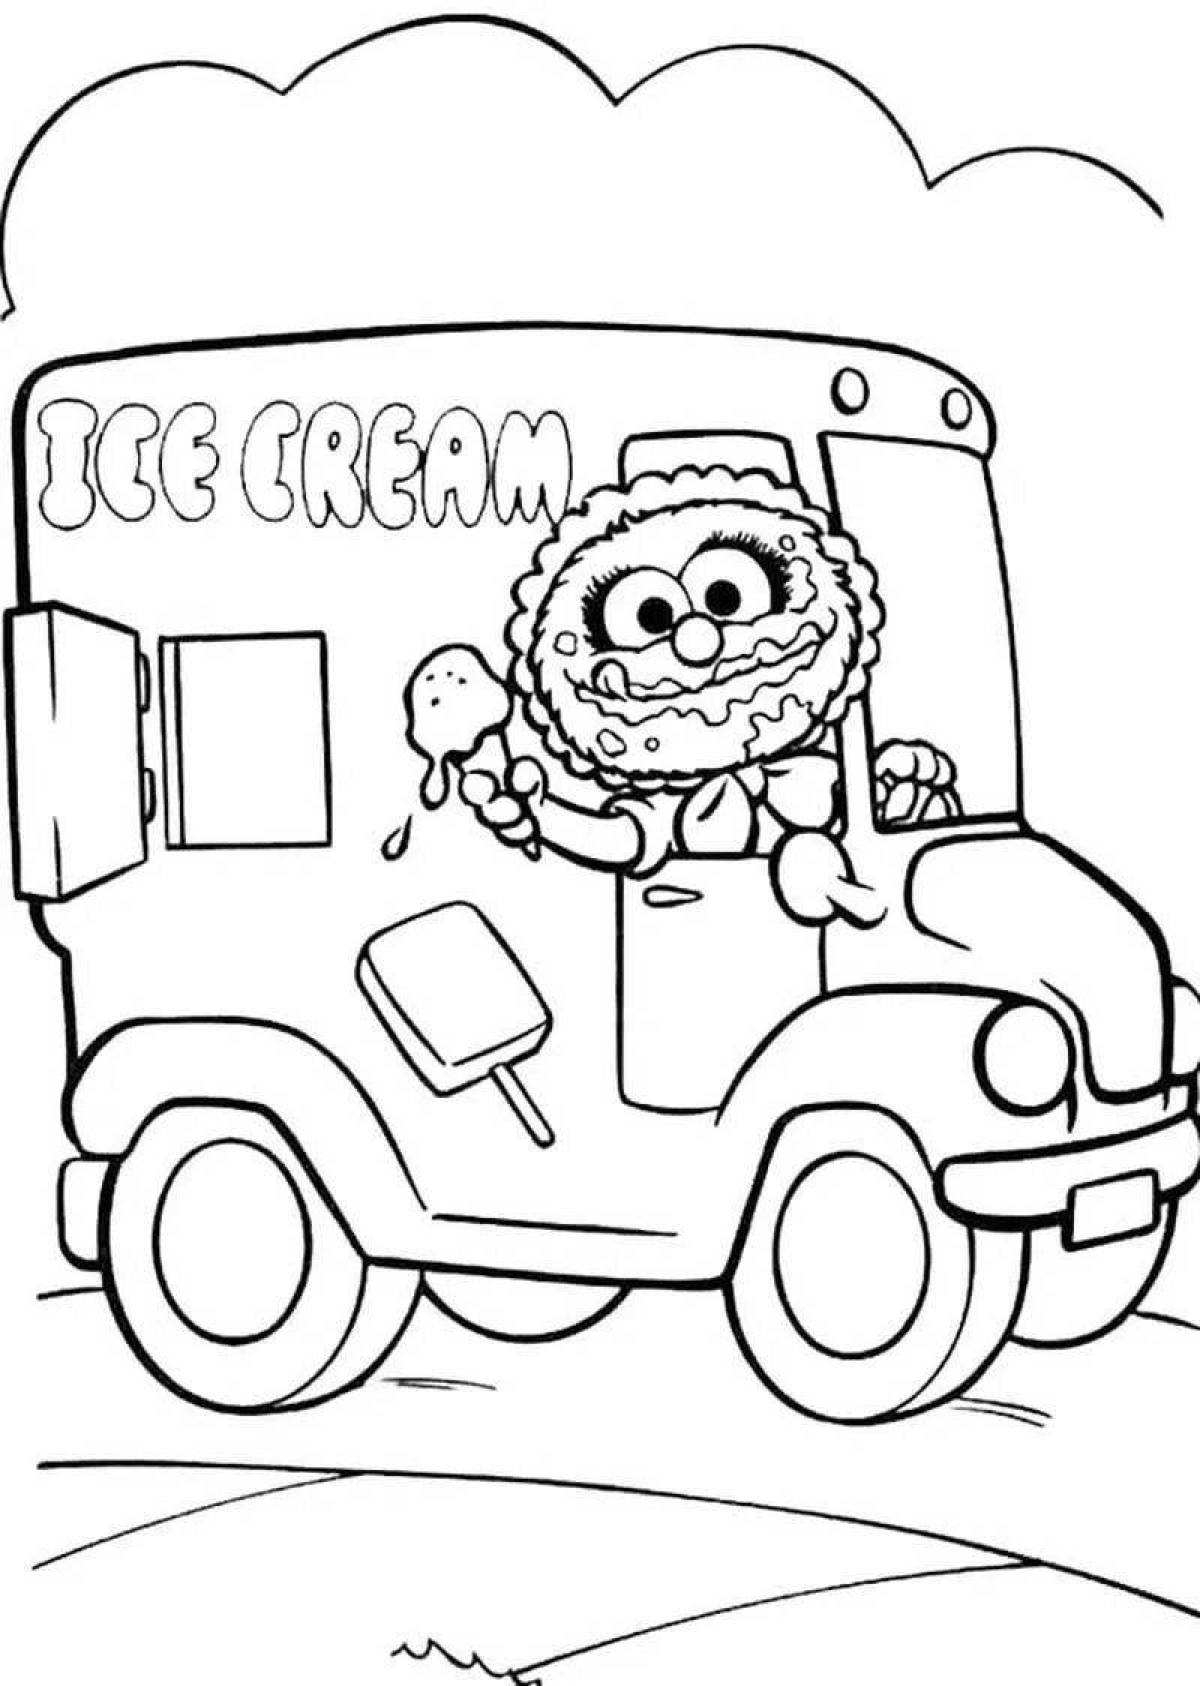 Charming ice cream man coloring book